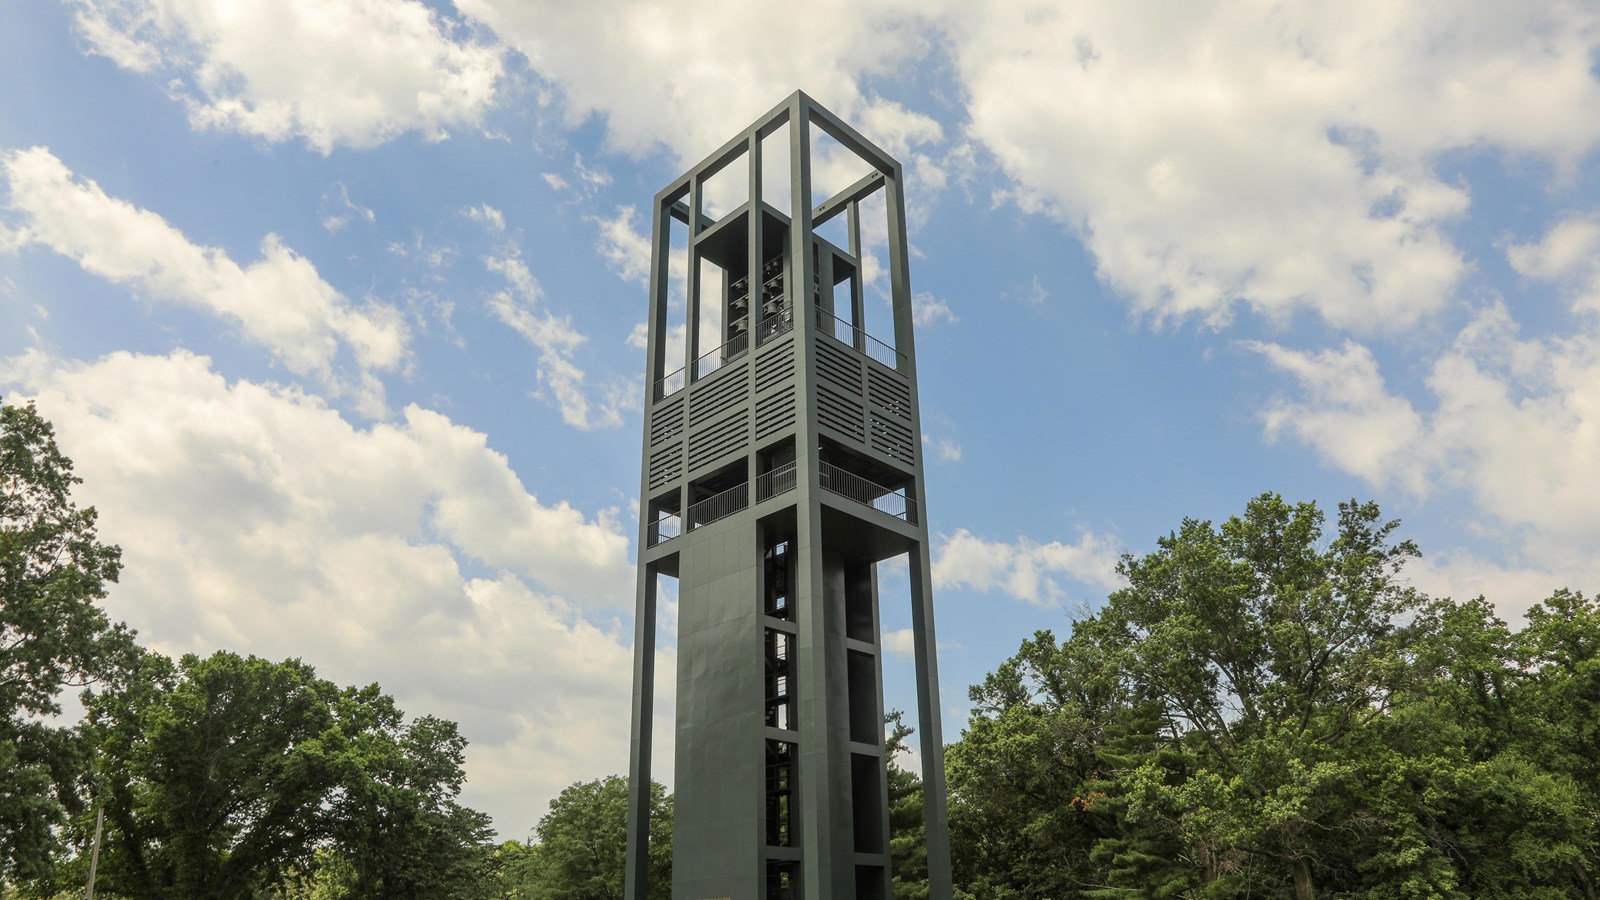 A tall bell tower against a cloudy sky